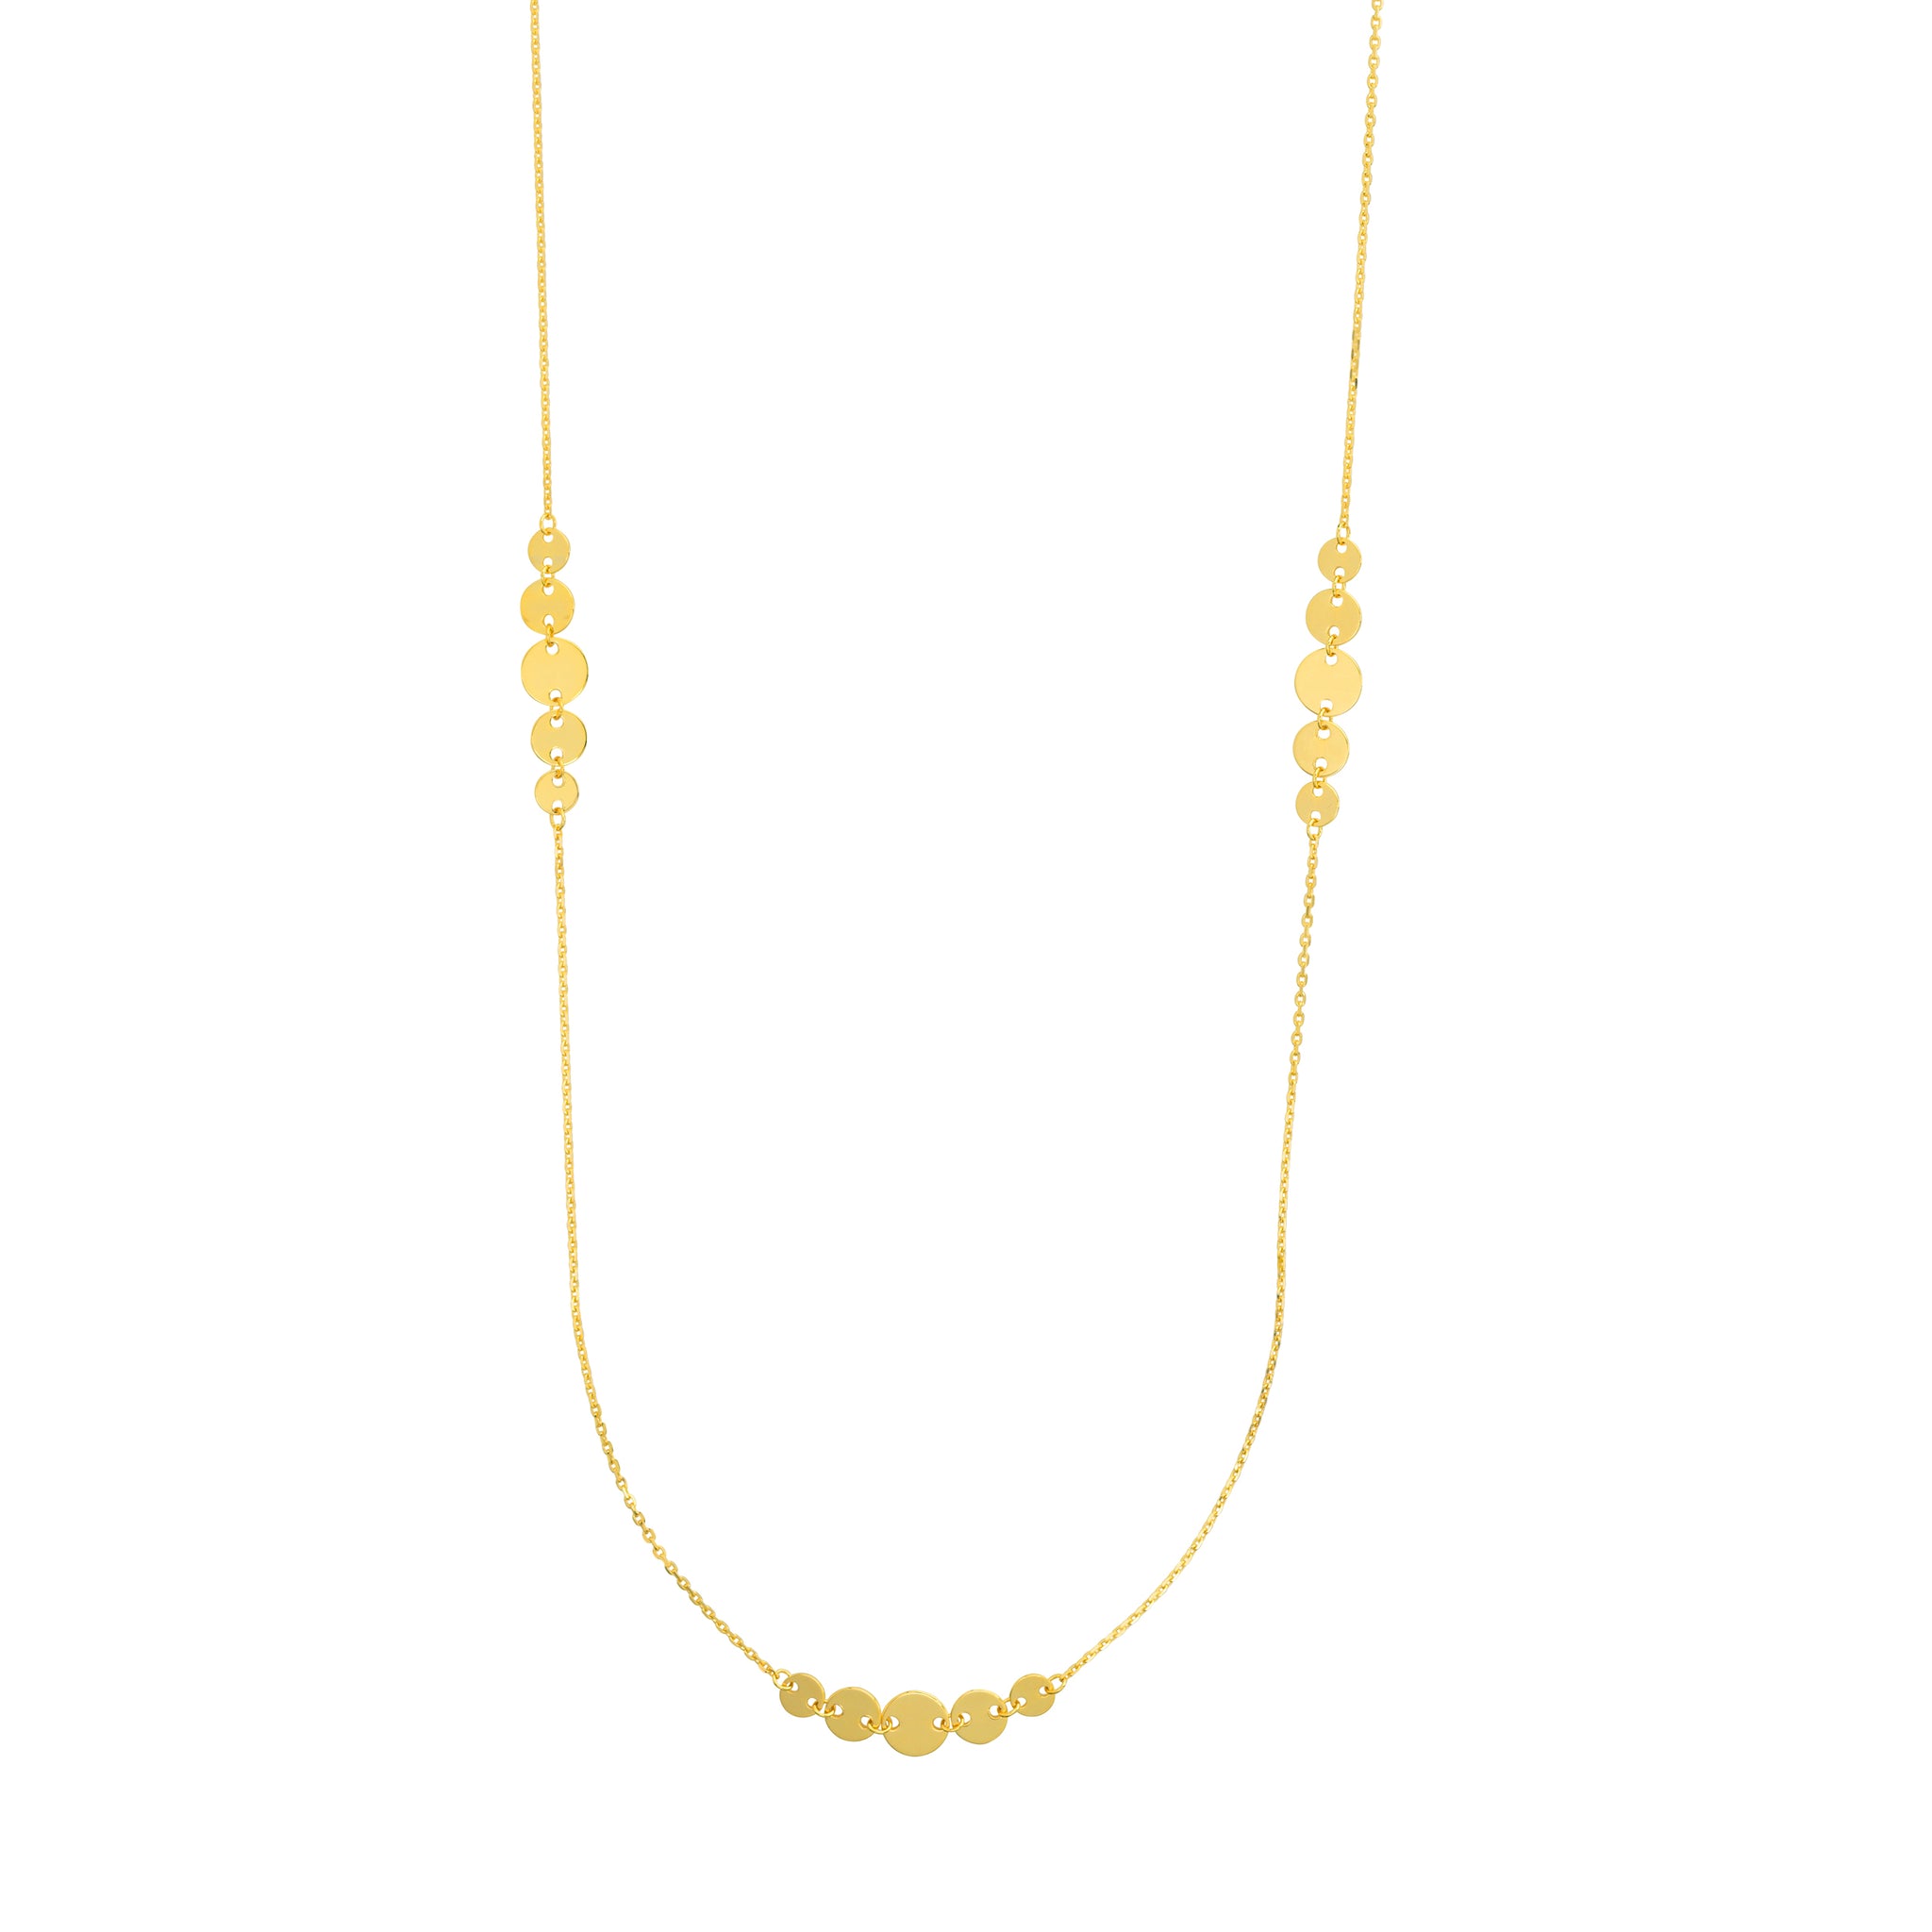 Hemsleys Collection 14K Yellow Gold Five Disc Seven Station Long Necklace